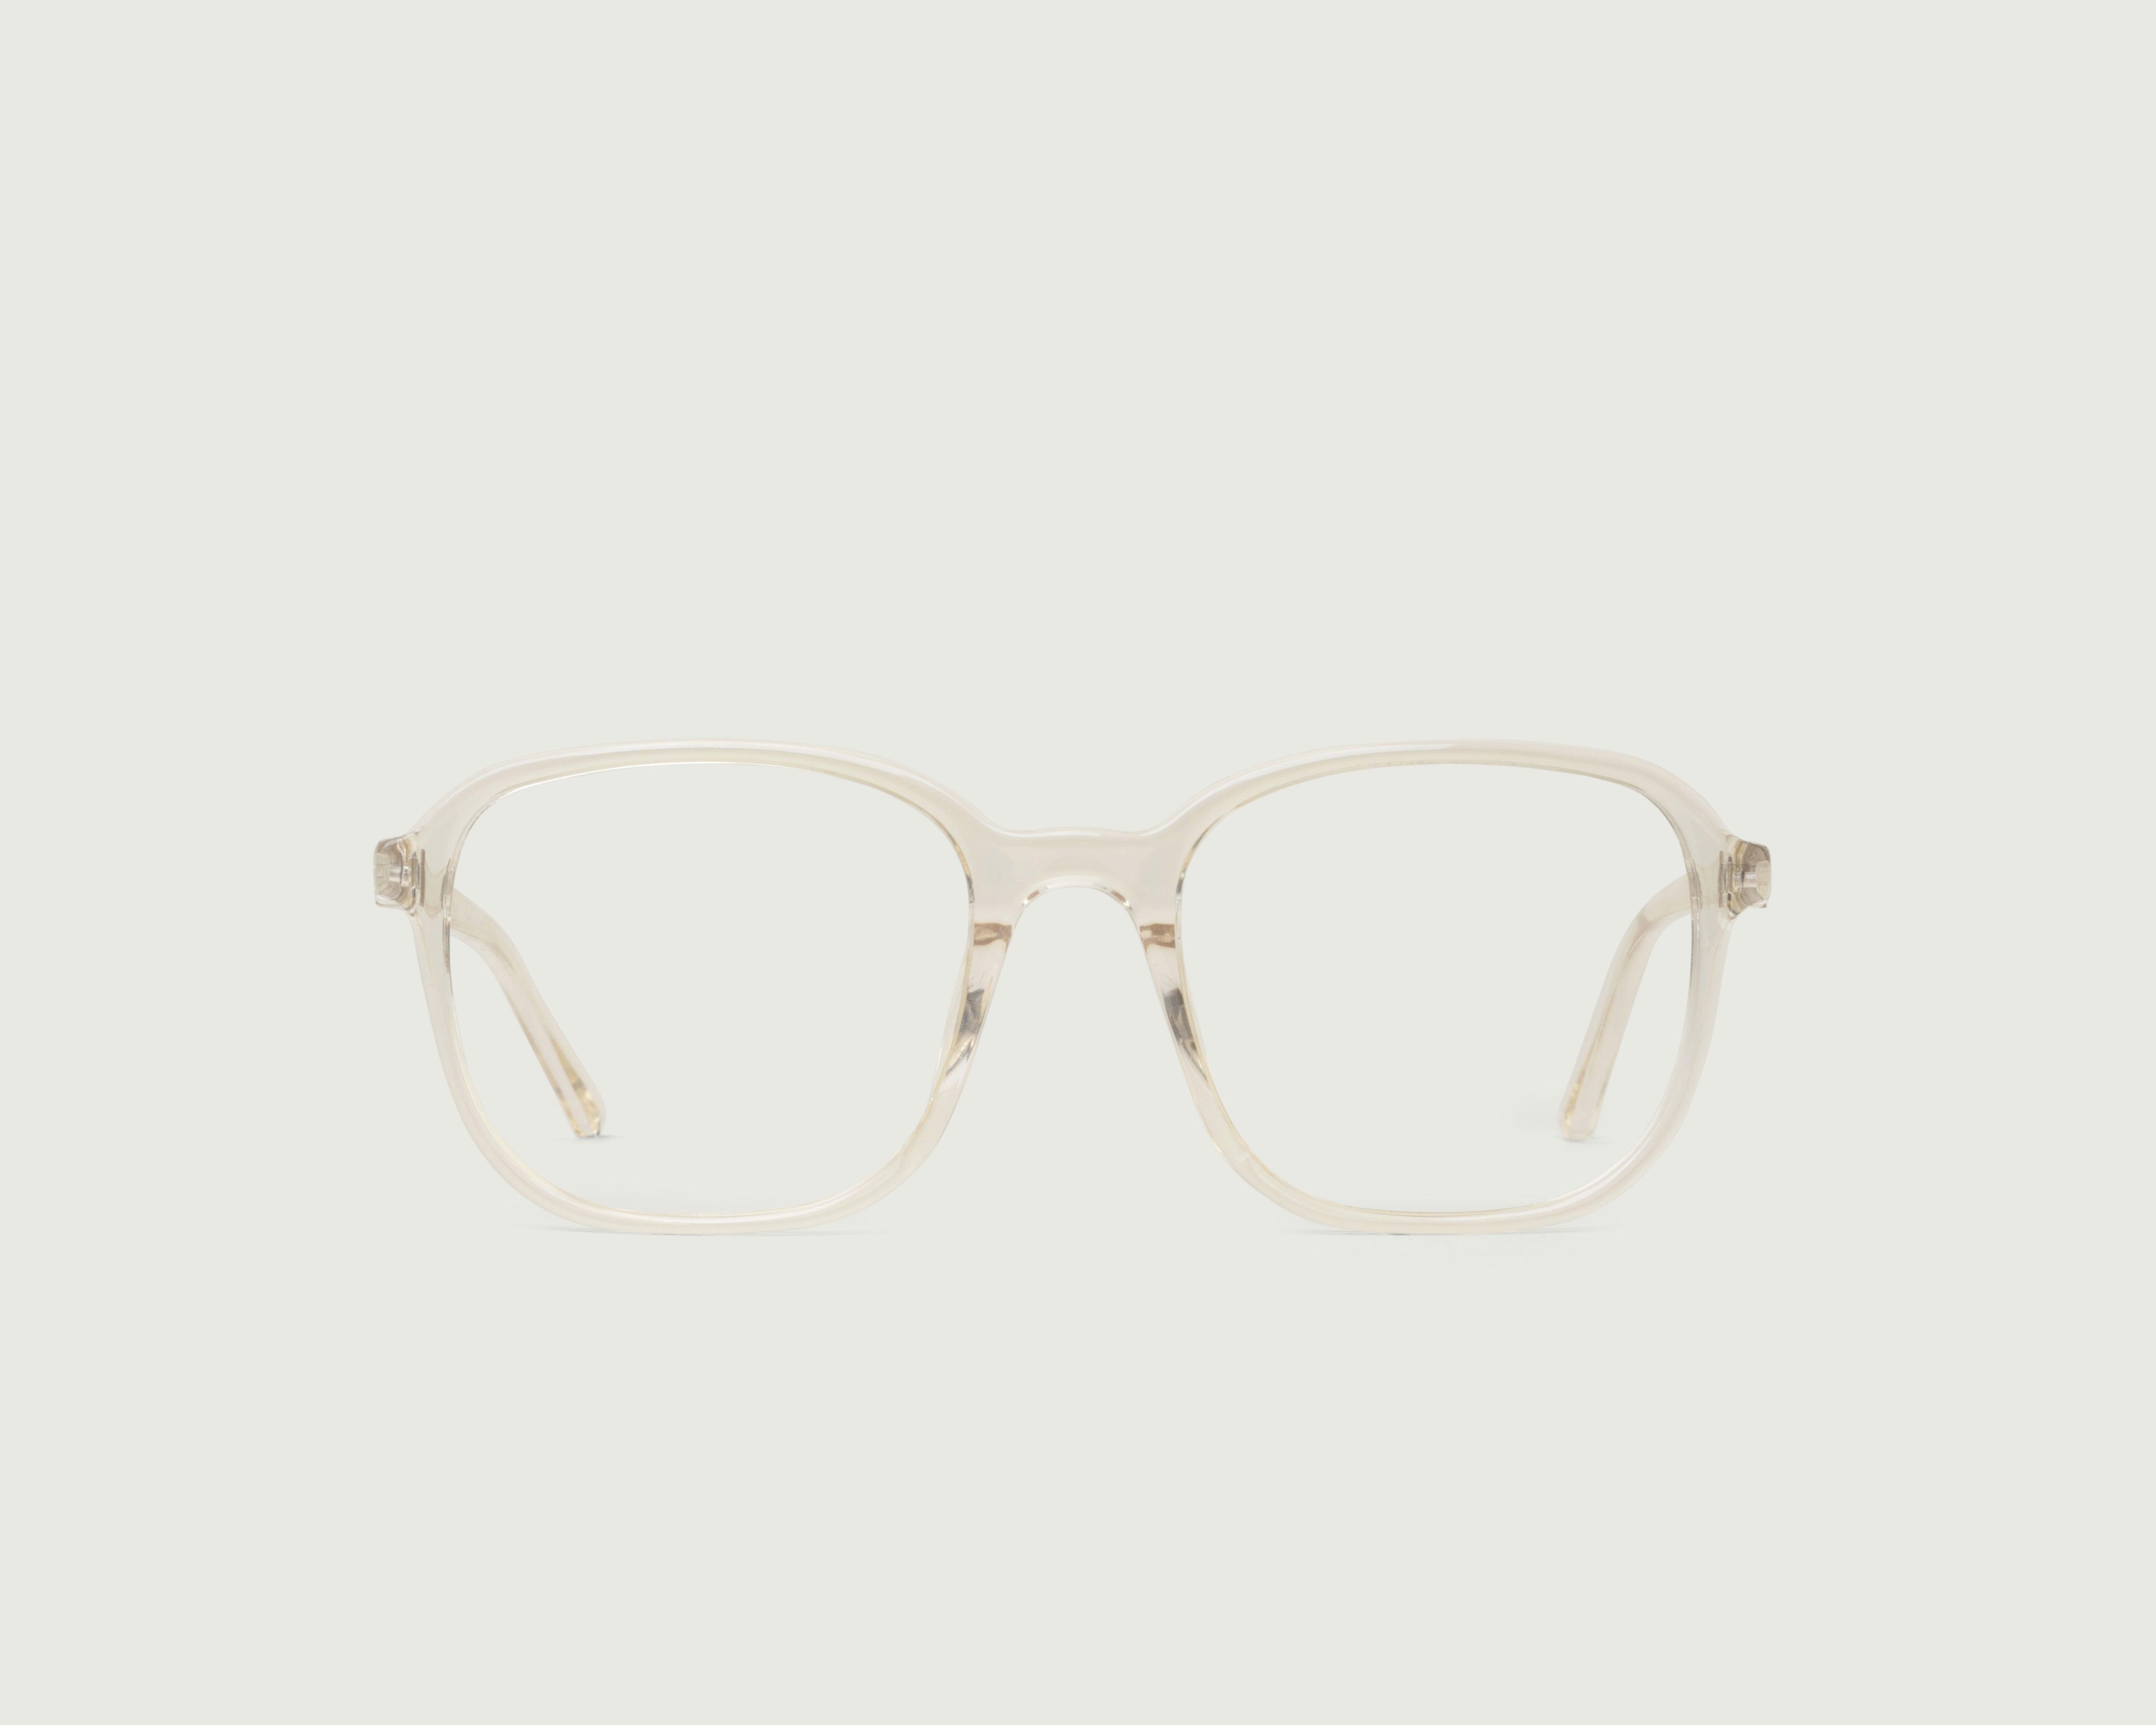 Jellyfish::Paige Eyeglasses square clear plant-based plastic front